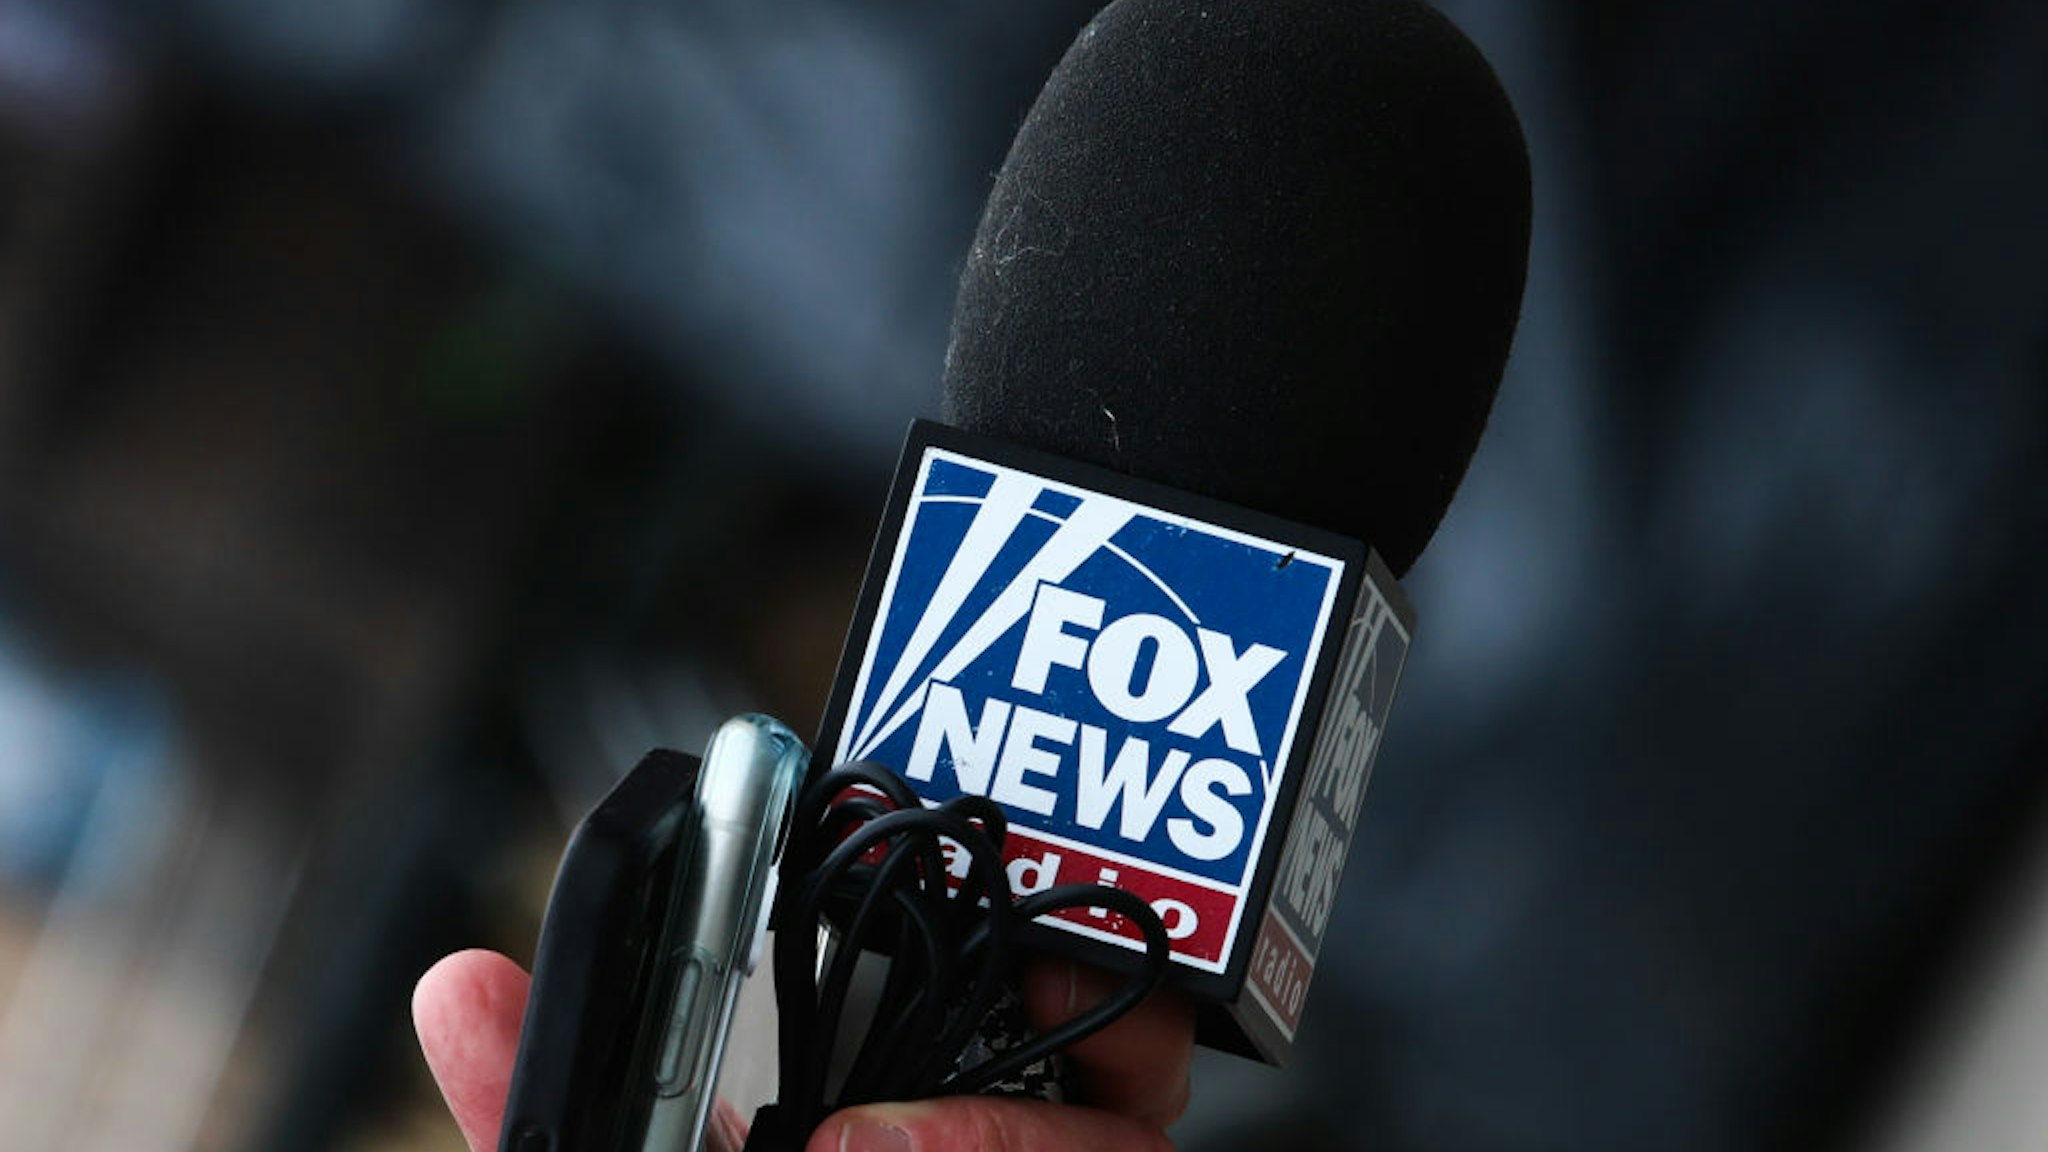 Fox News logo is seen on a reporter's microphone in Przemysl, Poland on March 5, 2022.